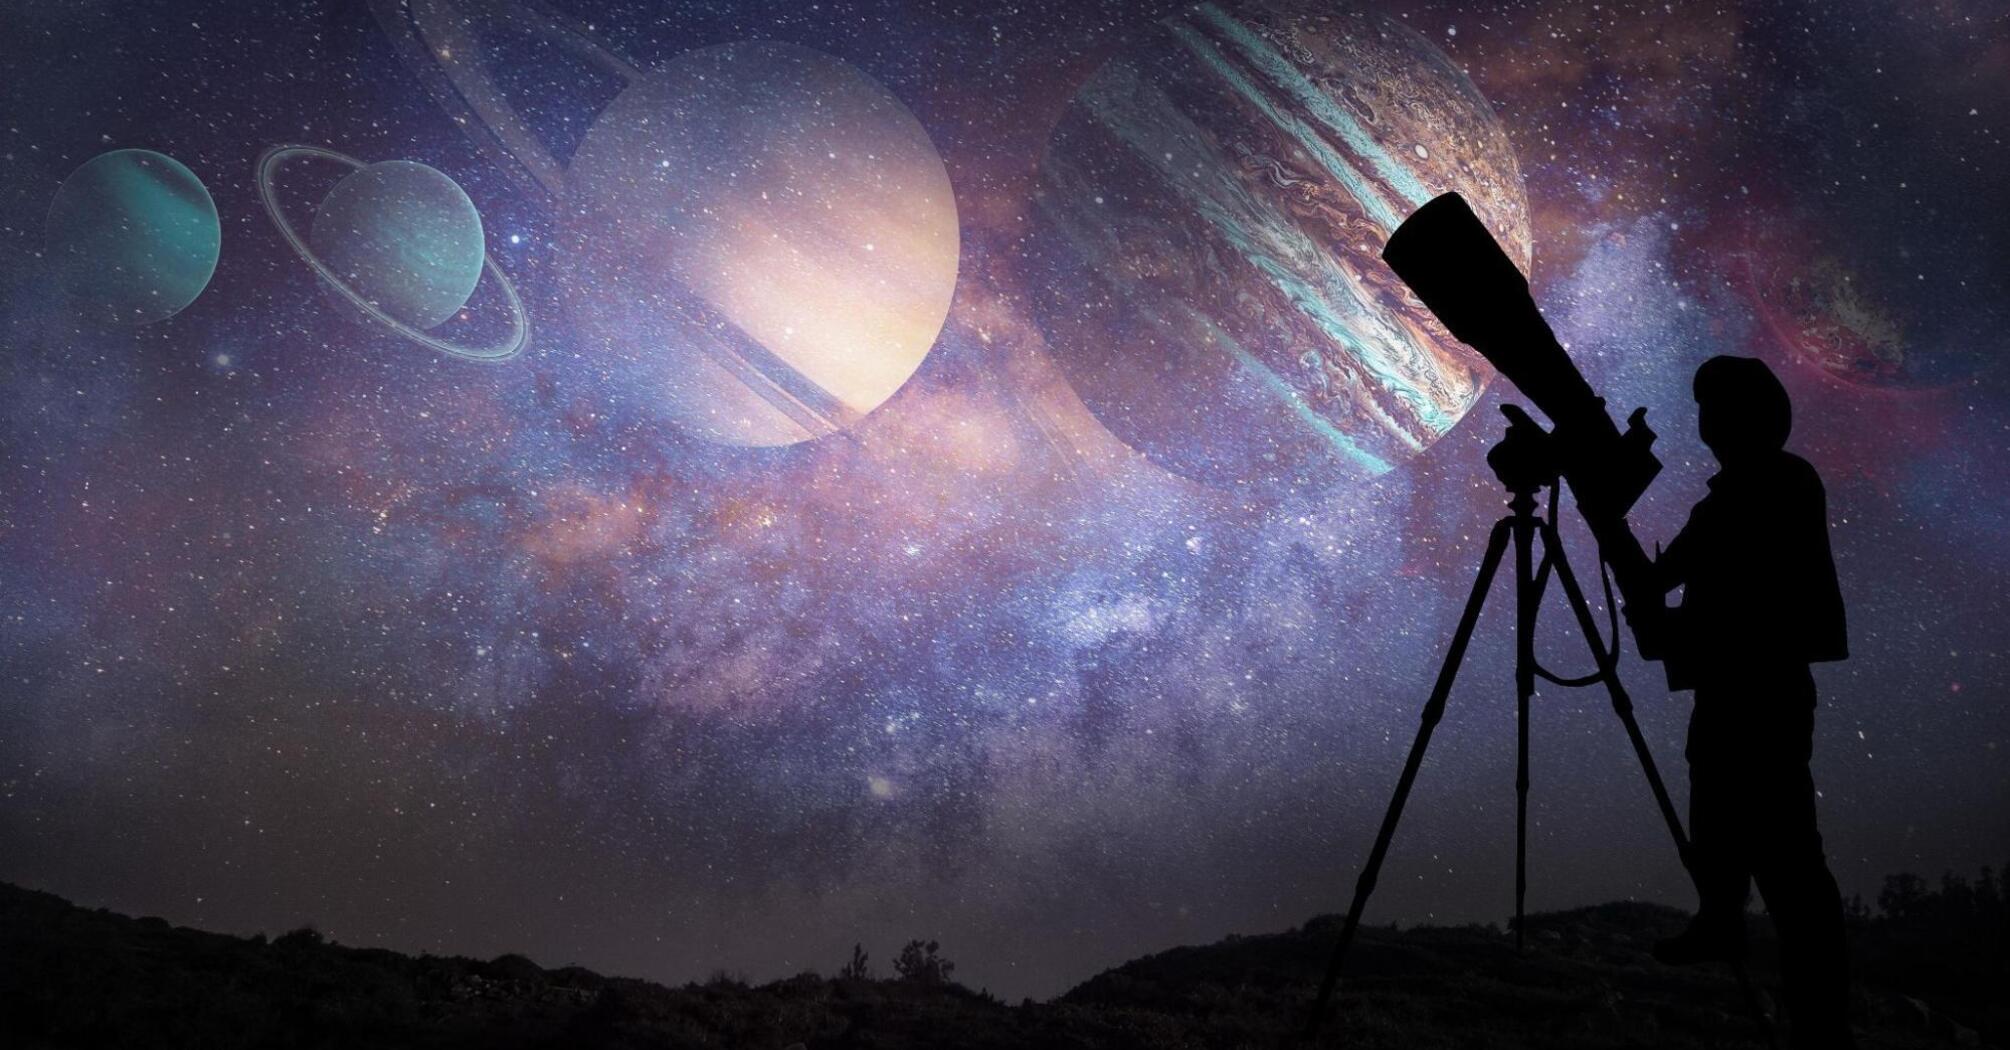 Telescope with a perspective on the starry sky